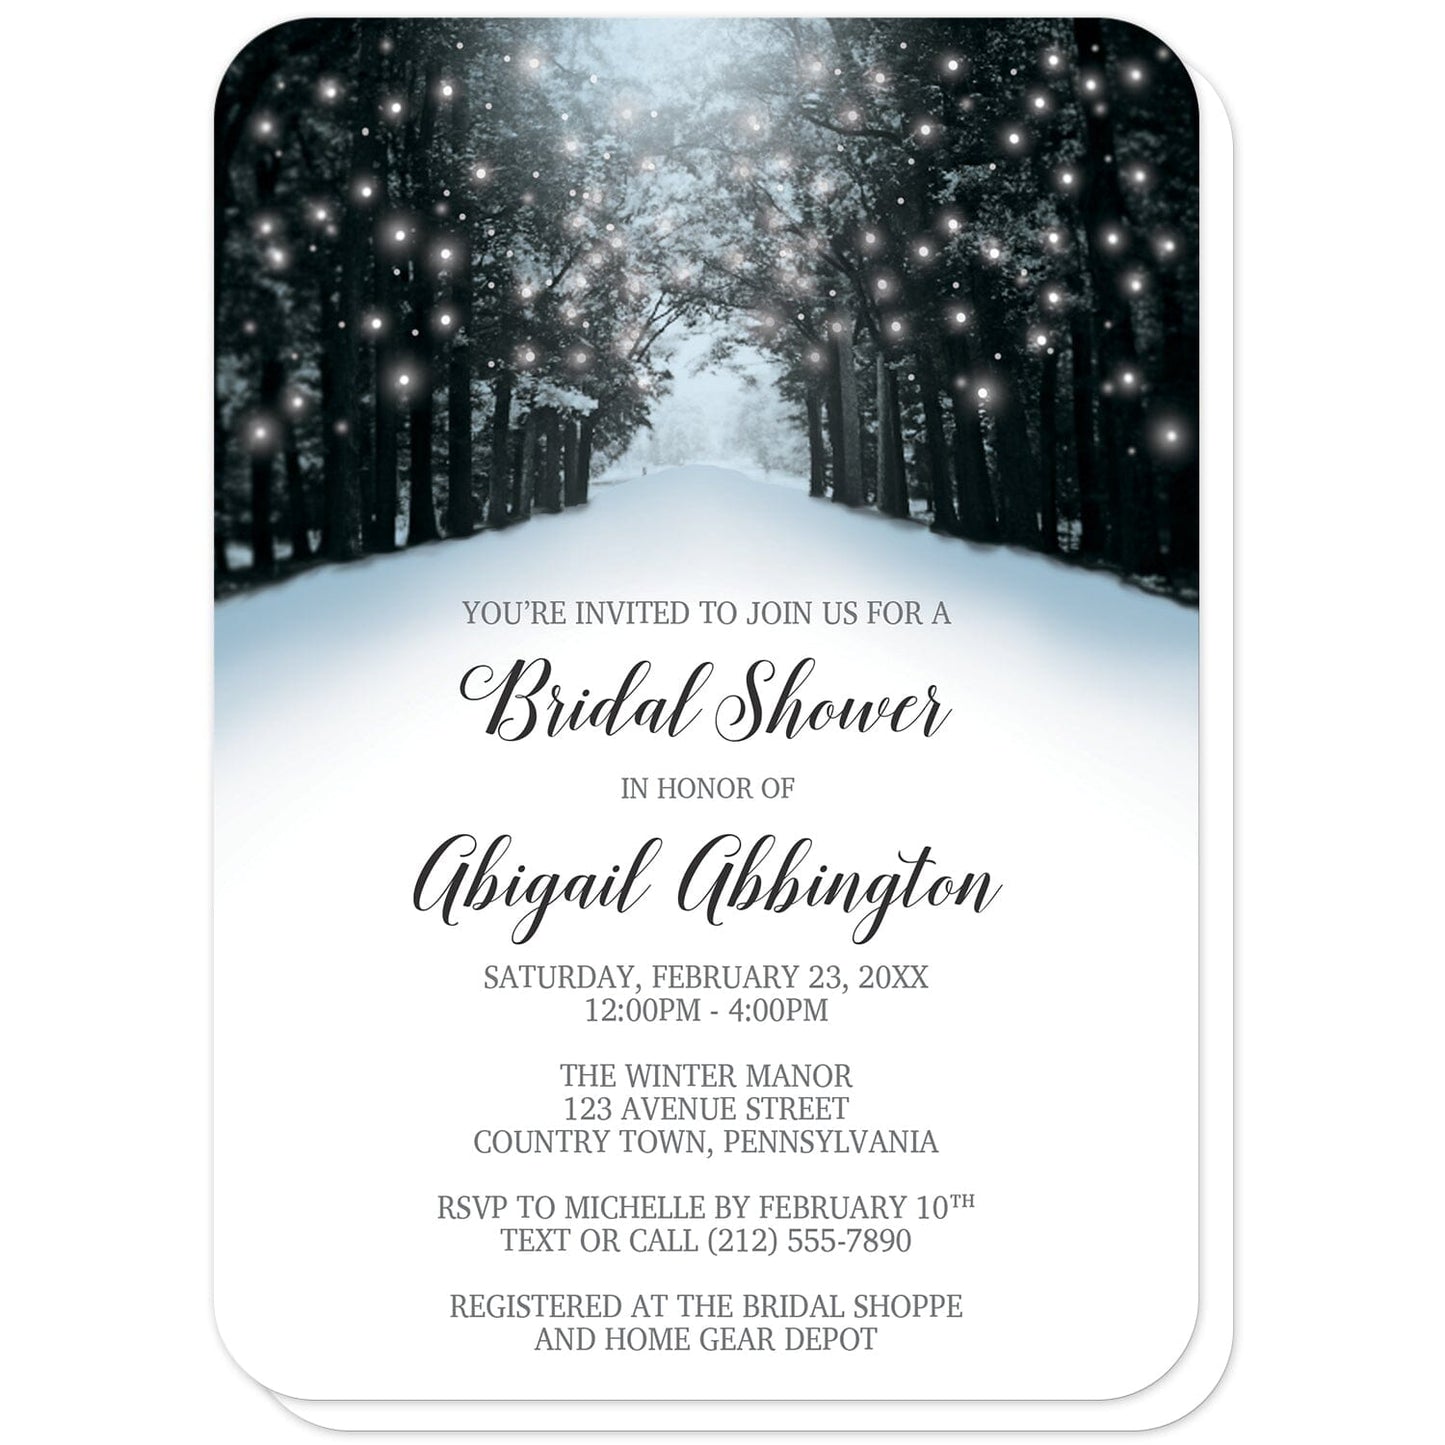 Snowy Winter Road Tree Lights Bridal Shower Invitations (with rounded corners) at Artistically Invited. Beautiful snowy winter road tree lights bridal shower invitations with a snowy tree lined road filled with white holiday lights. They're designed in a blue, black, and gray winter color scheme with a winter wonderland theme. 